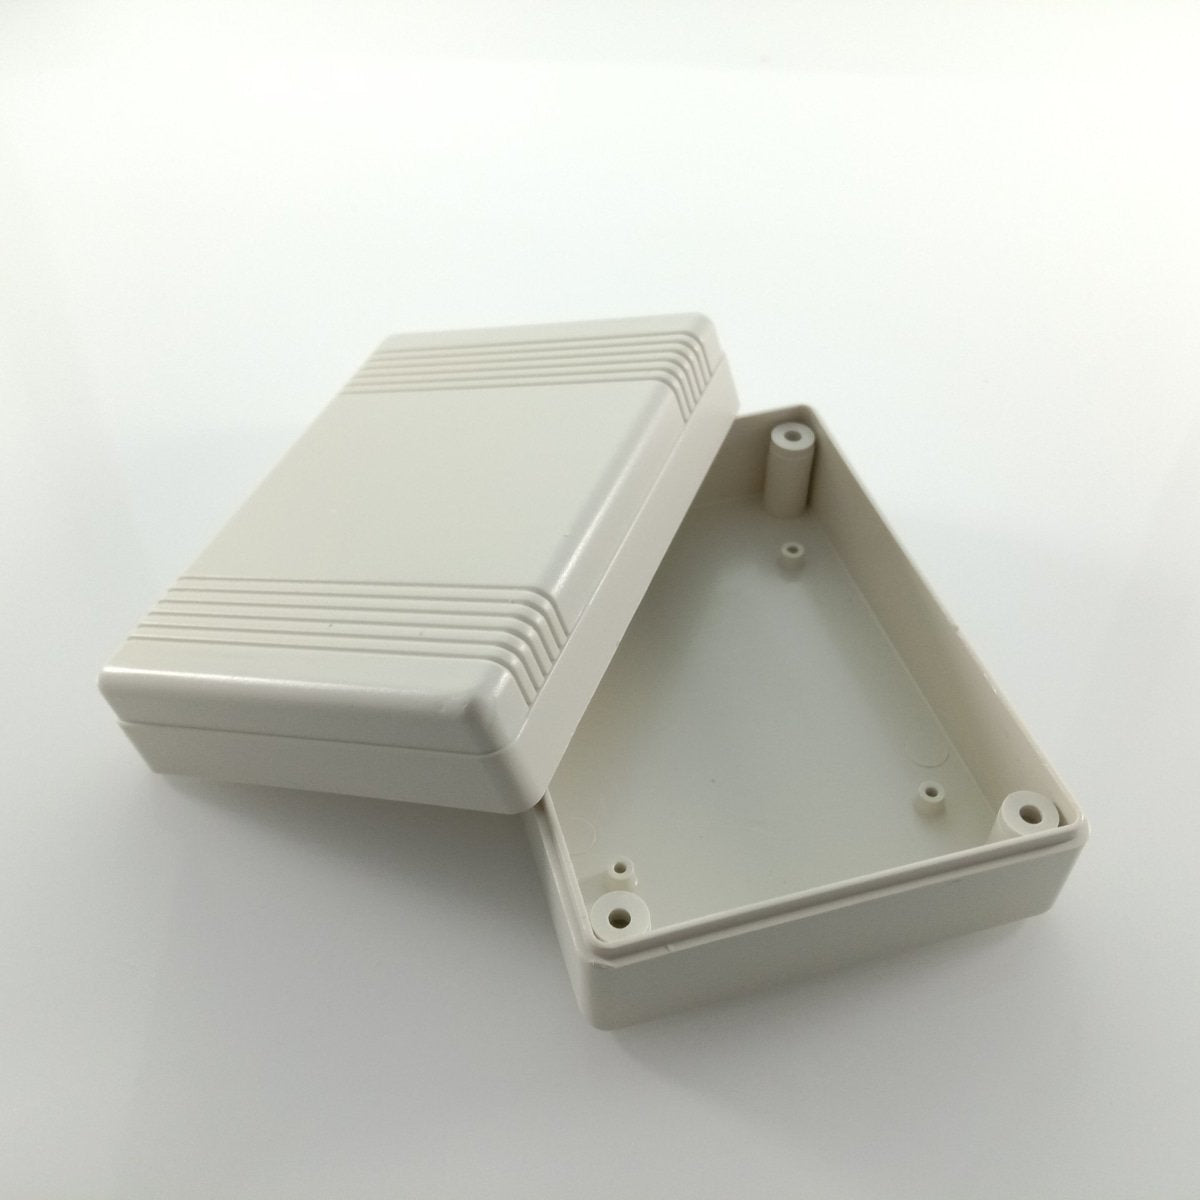 1pcs Electronic Project Case Box Enclosure Junction Box 50/55/70/80/90mm Length - 90x65x35mm - - Asia Sell